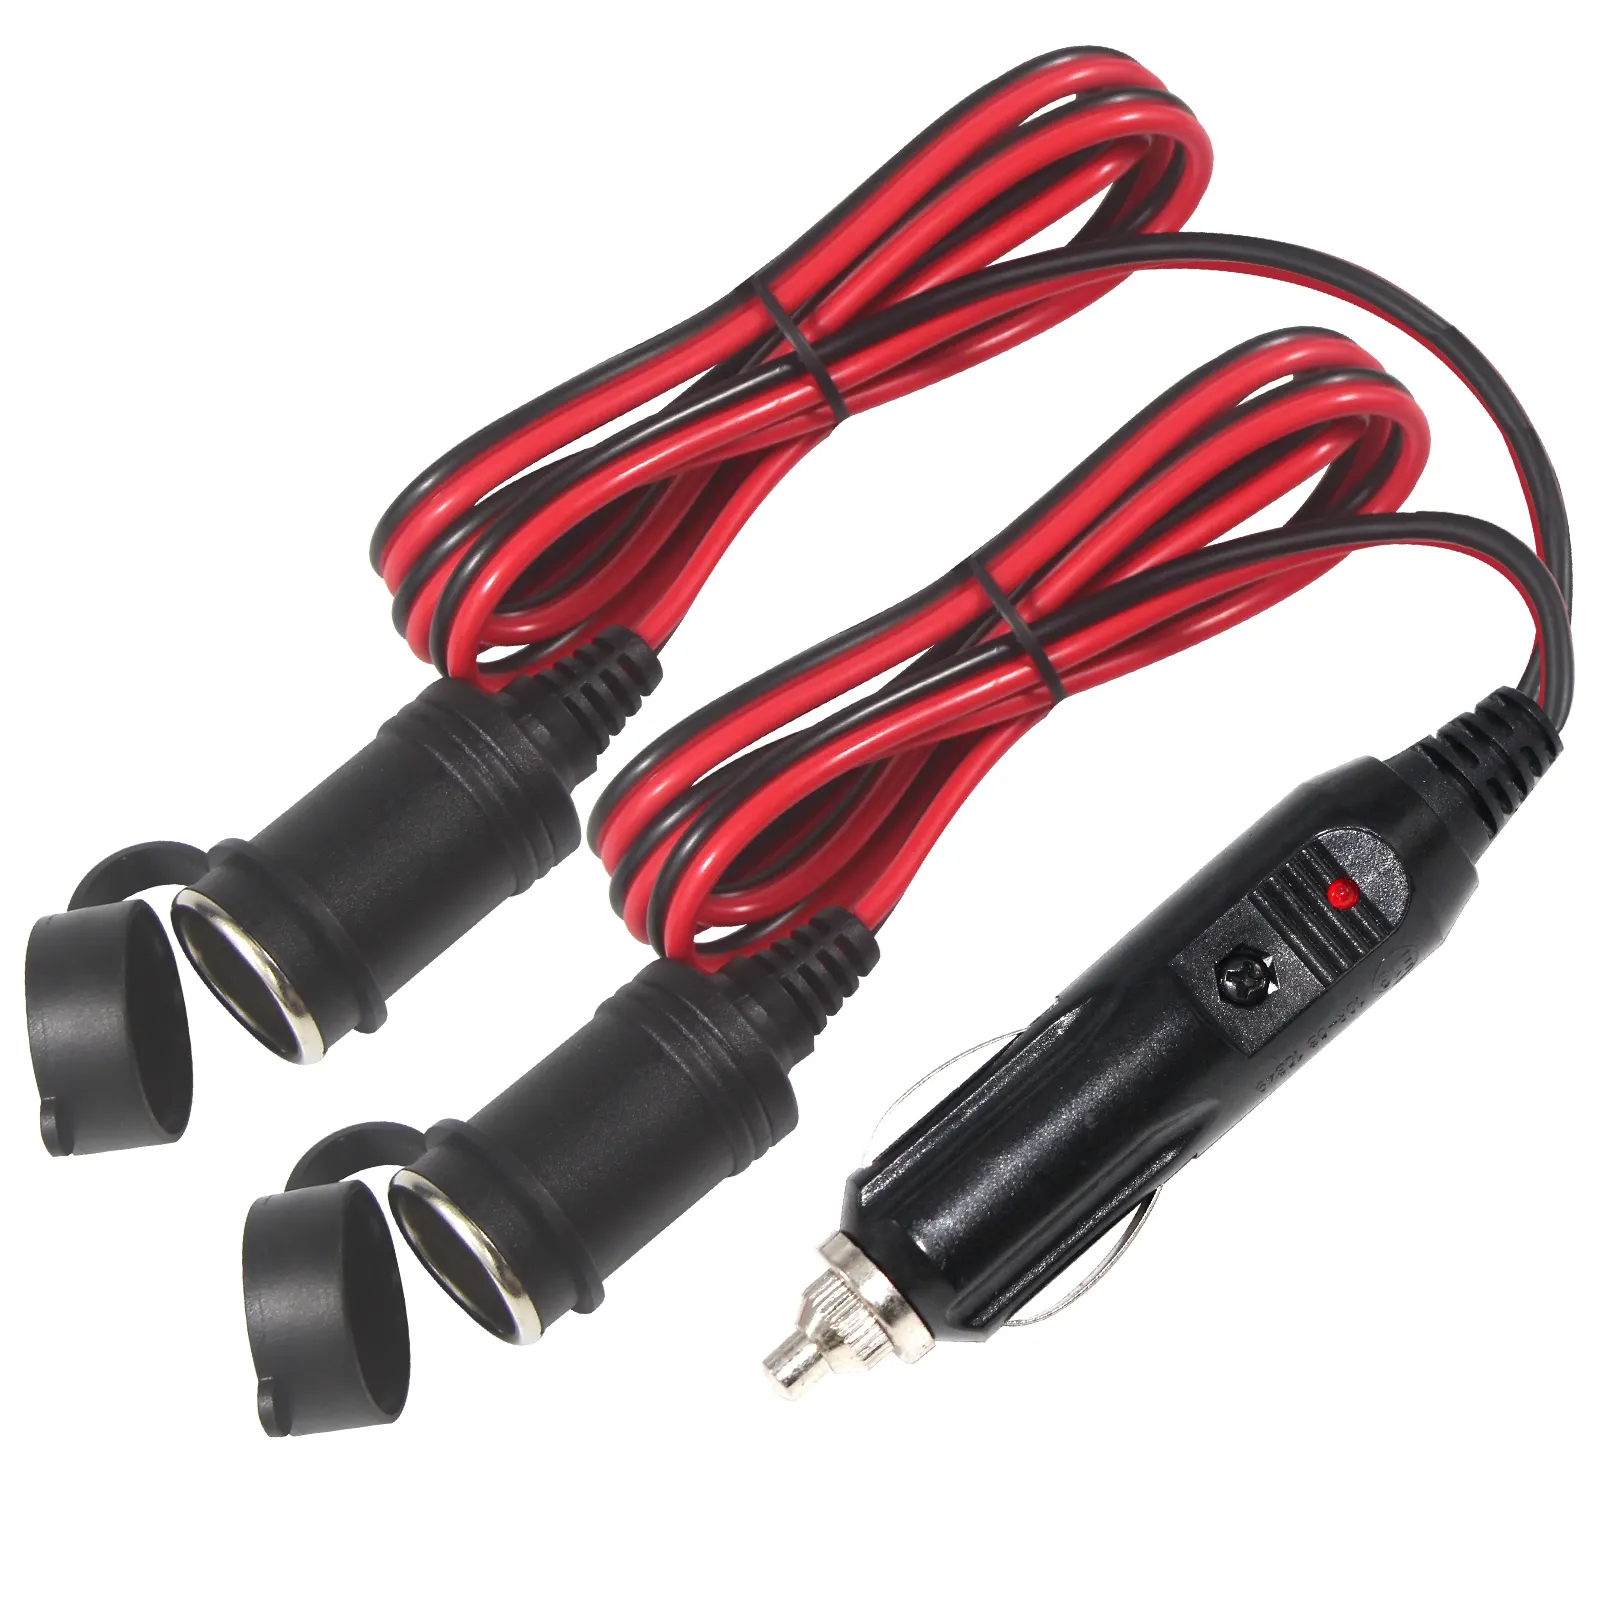 Car 12v Auto Cable Dc Power Cord Charger Connector Cigarette Lighter Plug To Female socket 2 Way Ports